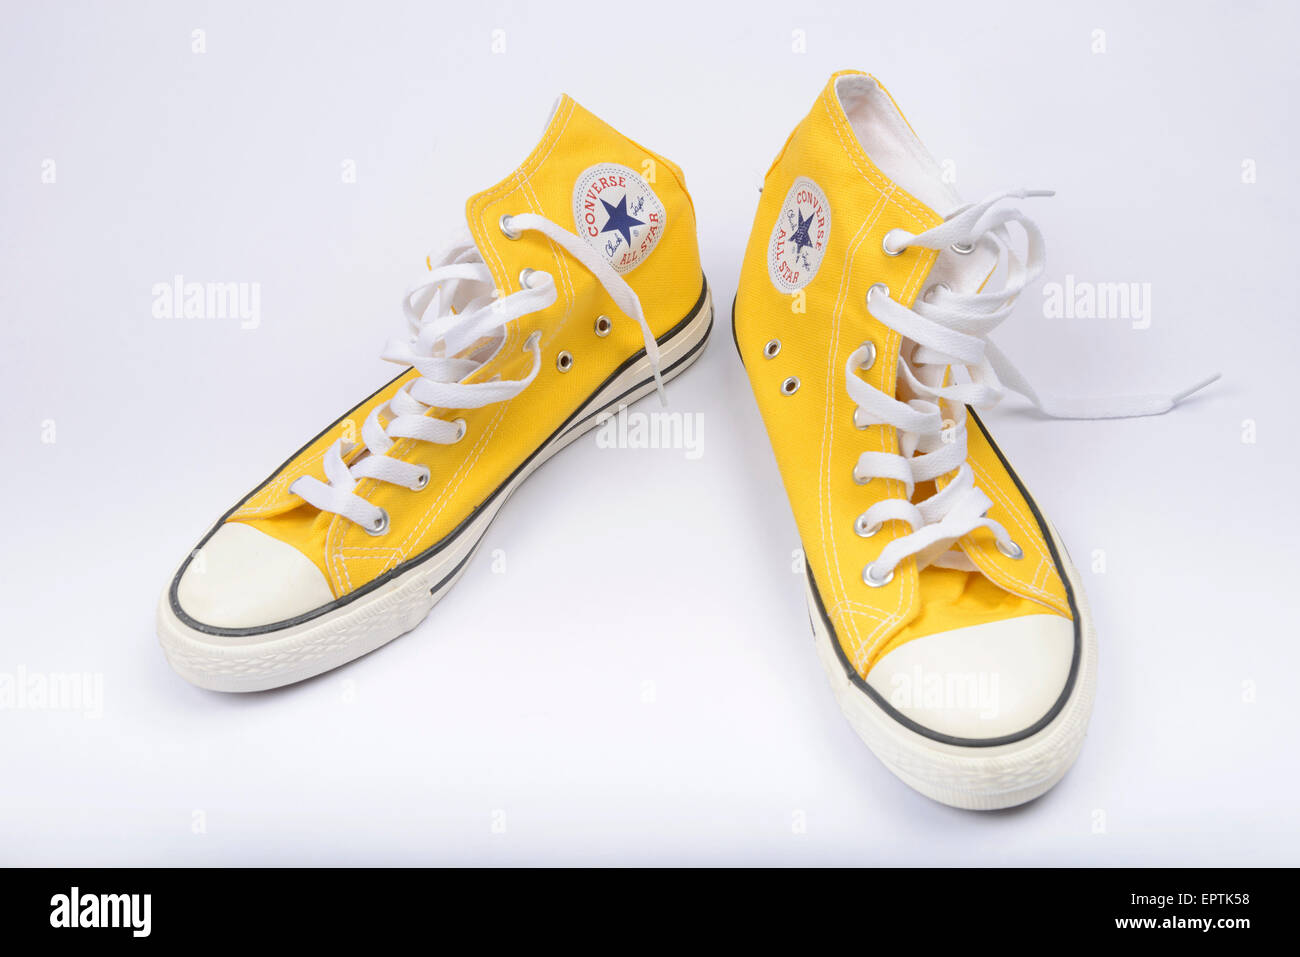 Yellow Converse Chuck Taylor All Star shoe pair Stock Photo - Alamy